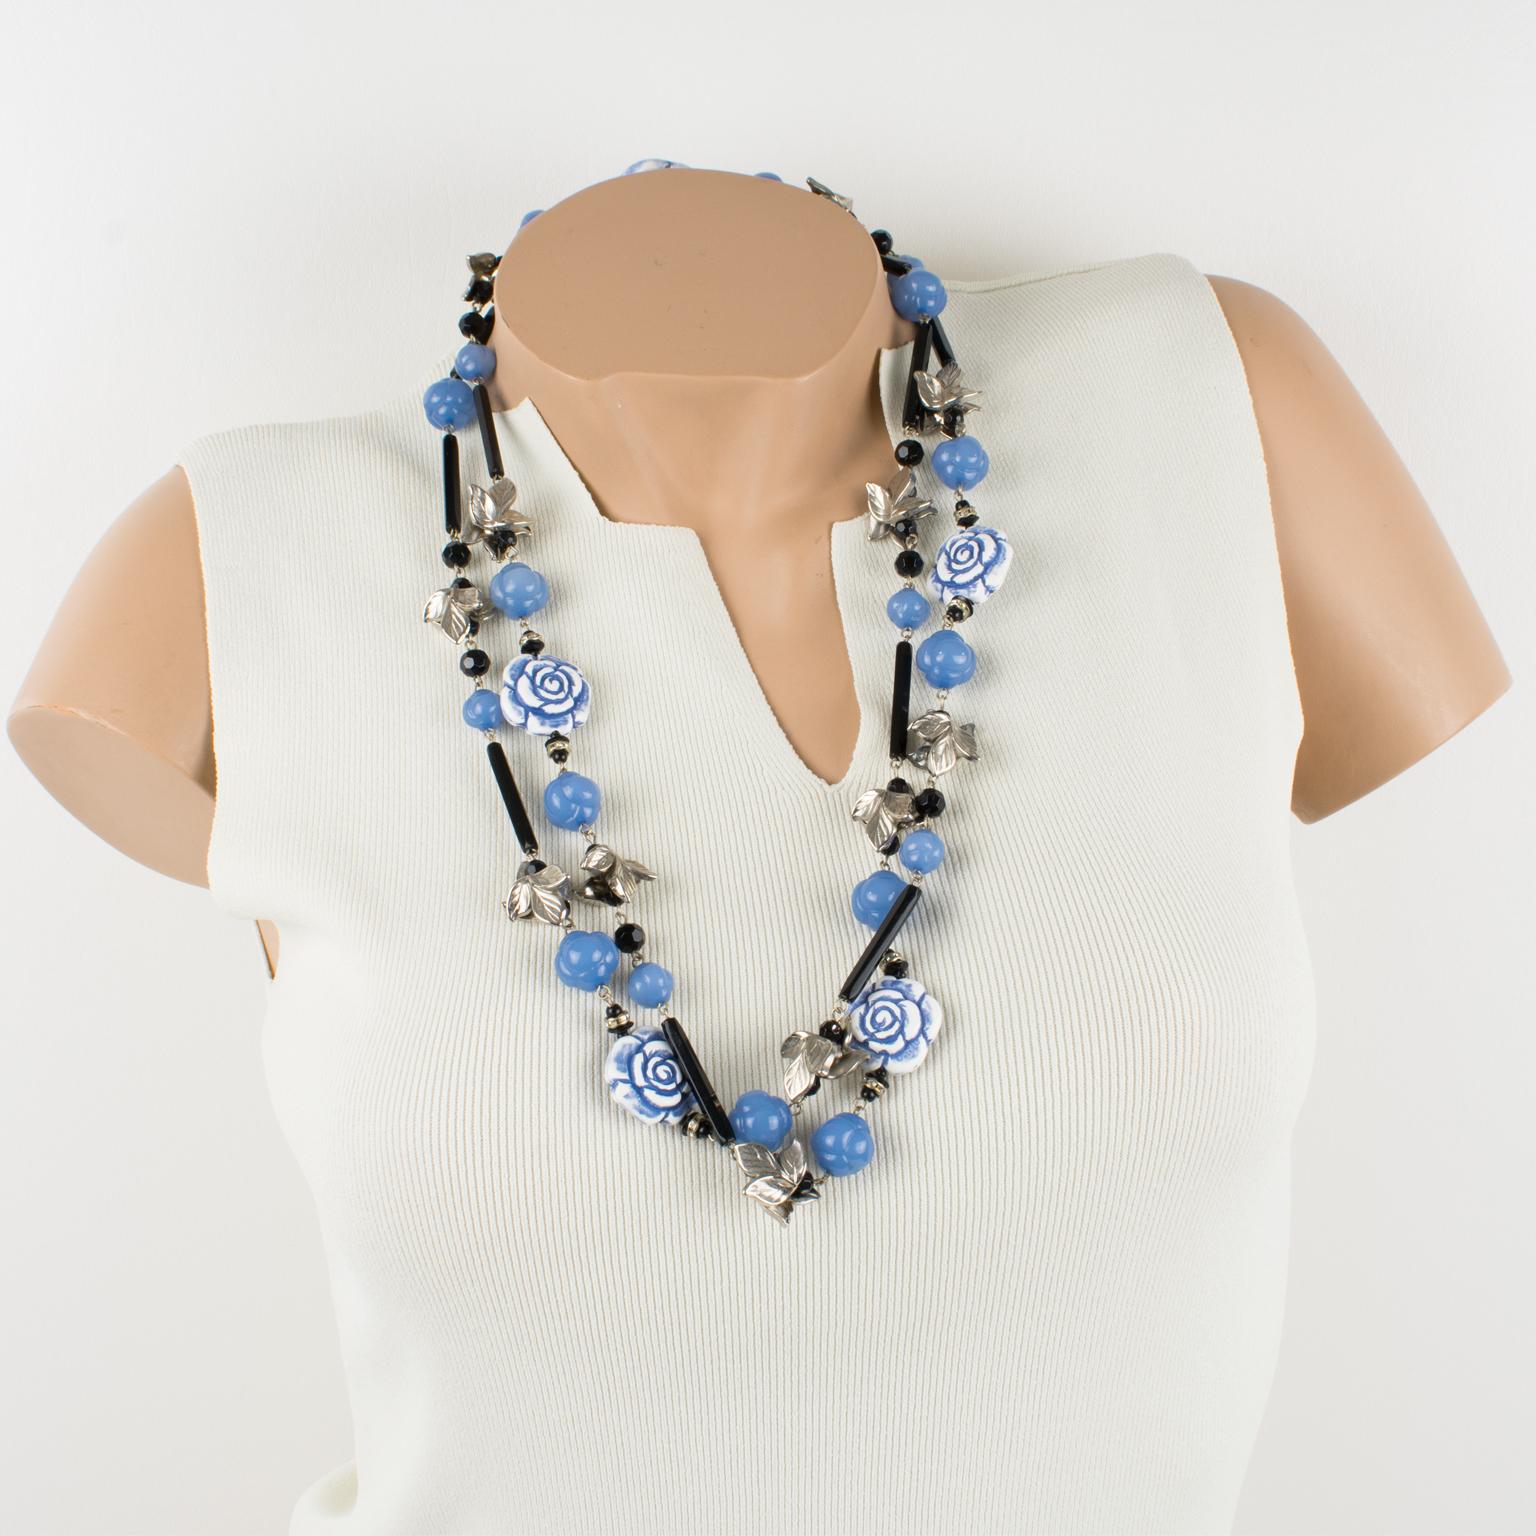 This elegant Angela Caputi necklace features a romantic-inspired extra-long design built with blue-white carved resin roses, lavender-blue beads, and silvered resin leaves. Her matching of colors is always bold and  classy.
As you know, Caputi